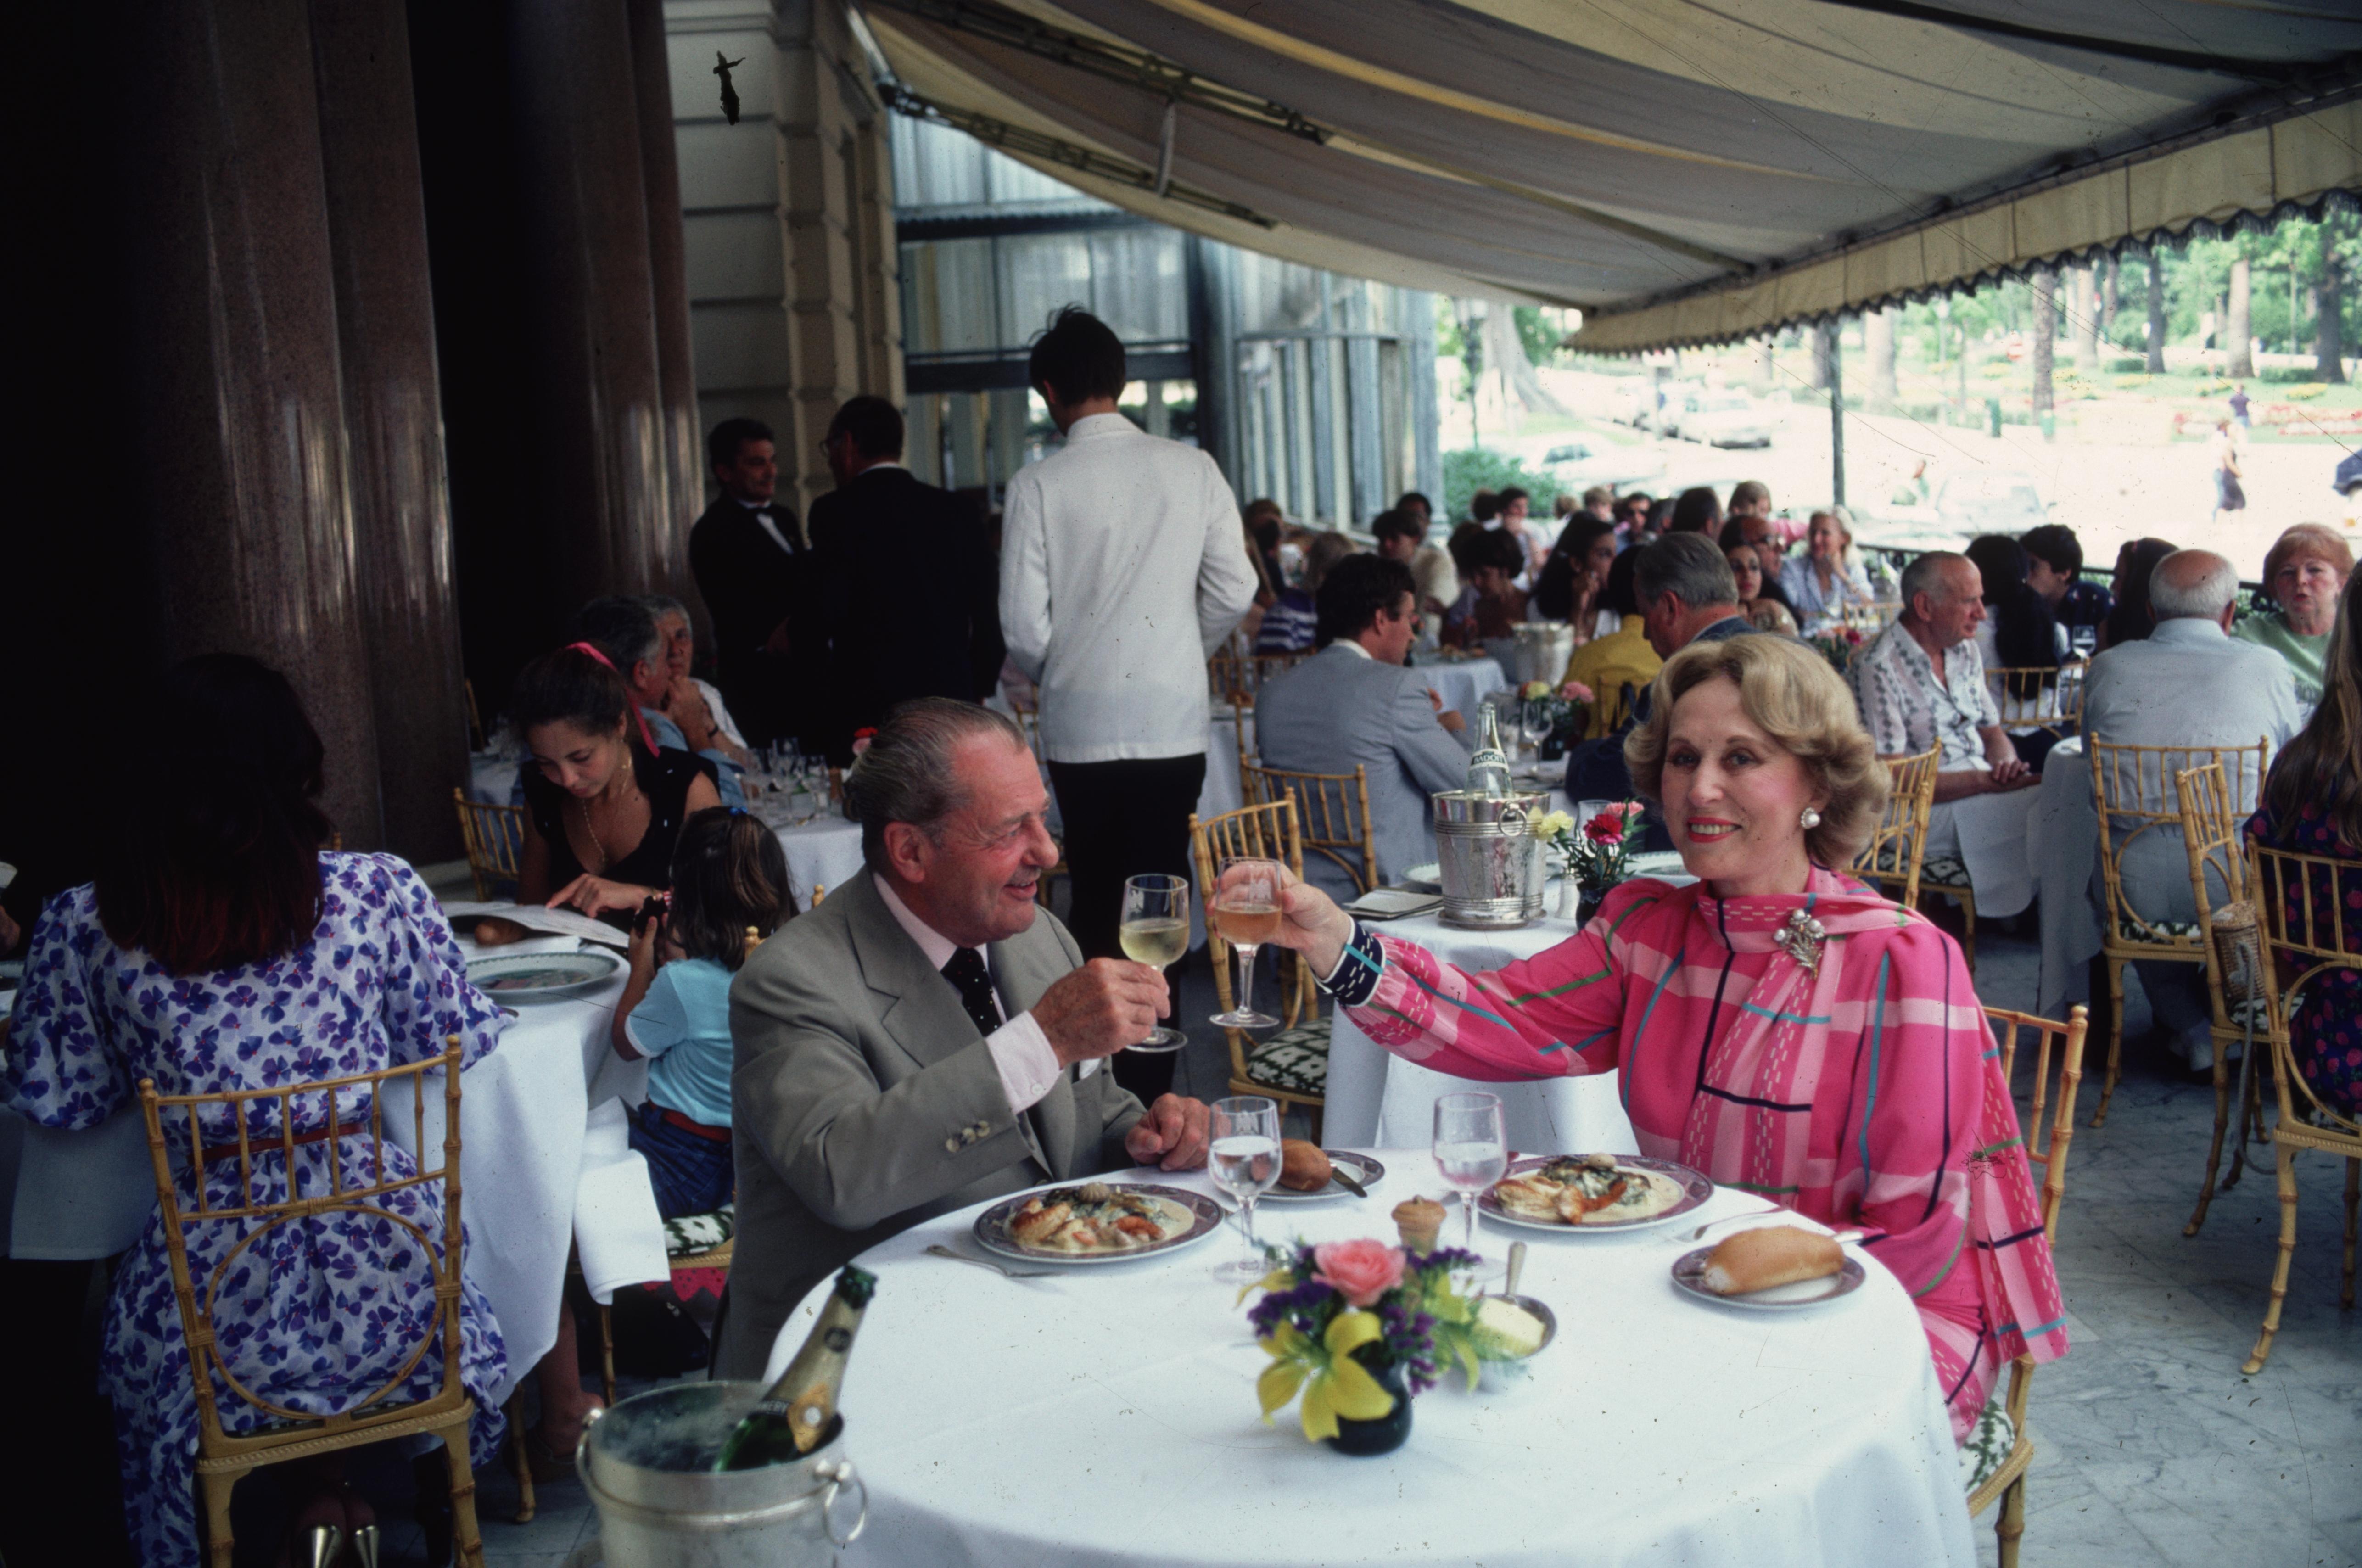 'Hotel De Paris' 1981 Slim Aarons Limited Estate Edition Print 

August 1981: Prince de Polignac of Monaco and Estee Lauder sharing a toast before dinner at the Hotel de Paris in Monte Carlo.

Produced from the original transparency
Certificate of